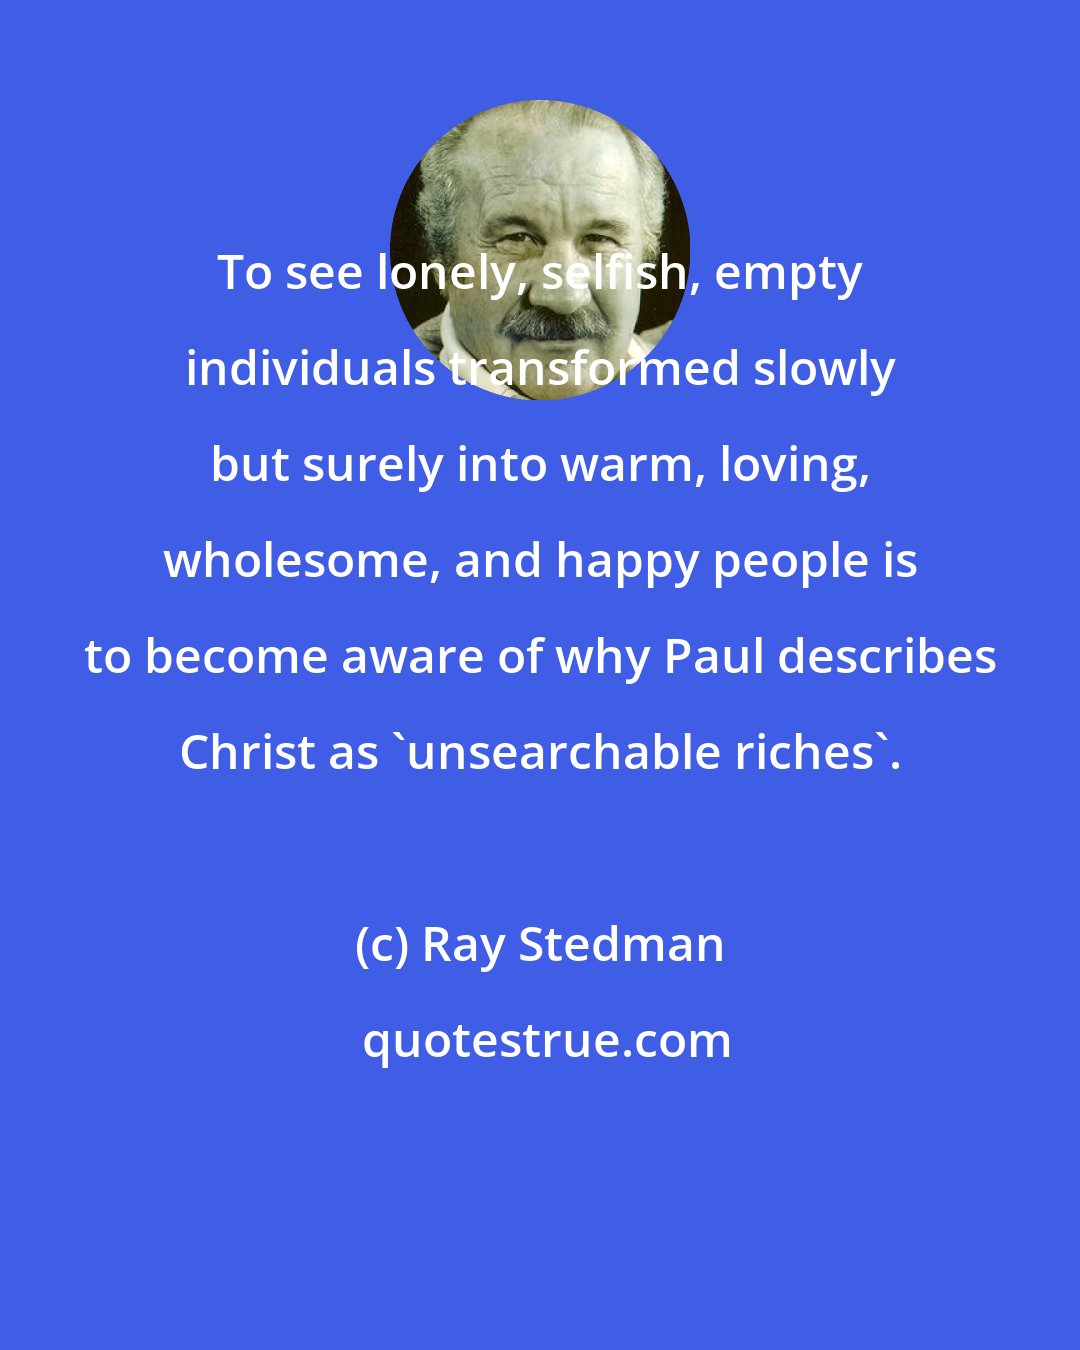 Ray Stedman: To see lonely, selfish, empty individuals transformed slowly but surely into warm, loving, wholesome, and happy people is to become aware of why Paul describes Christ as 'unsearchable riches'.